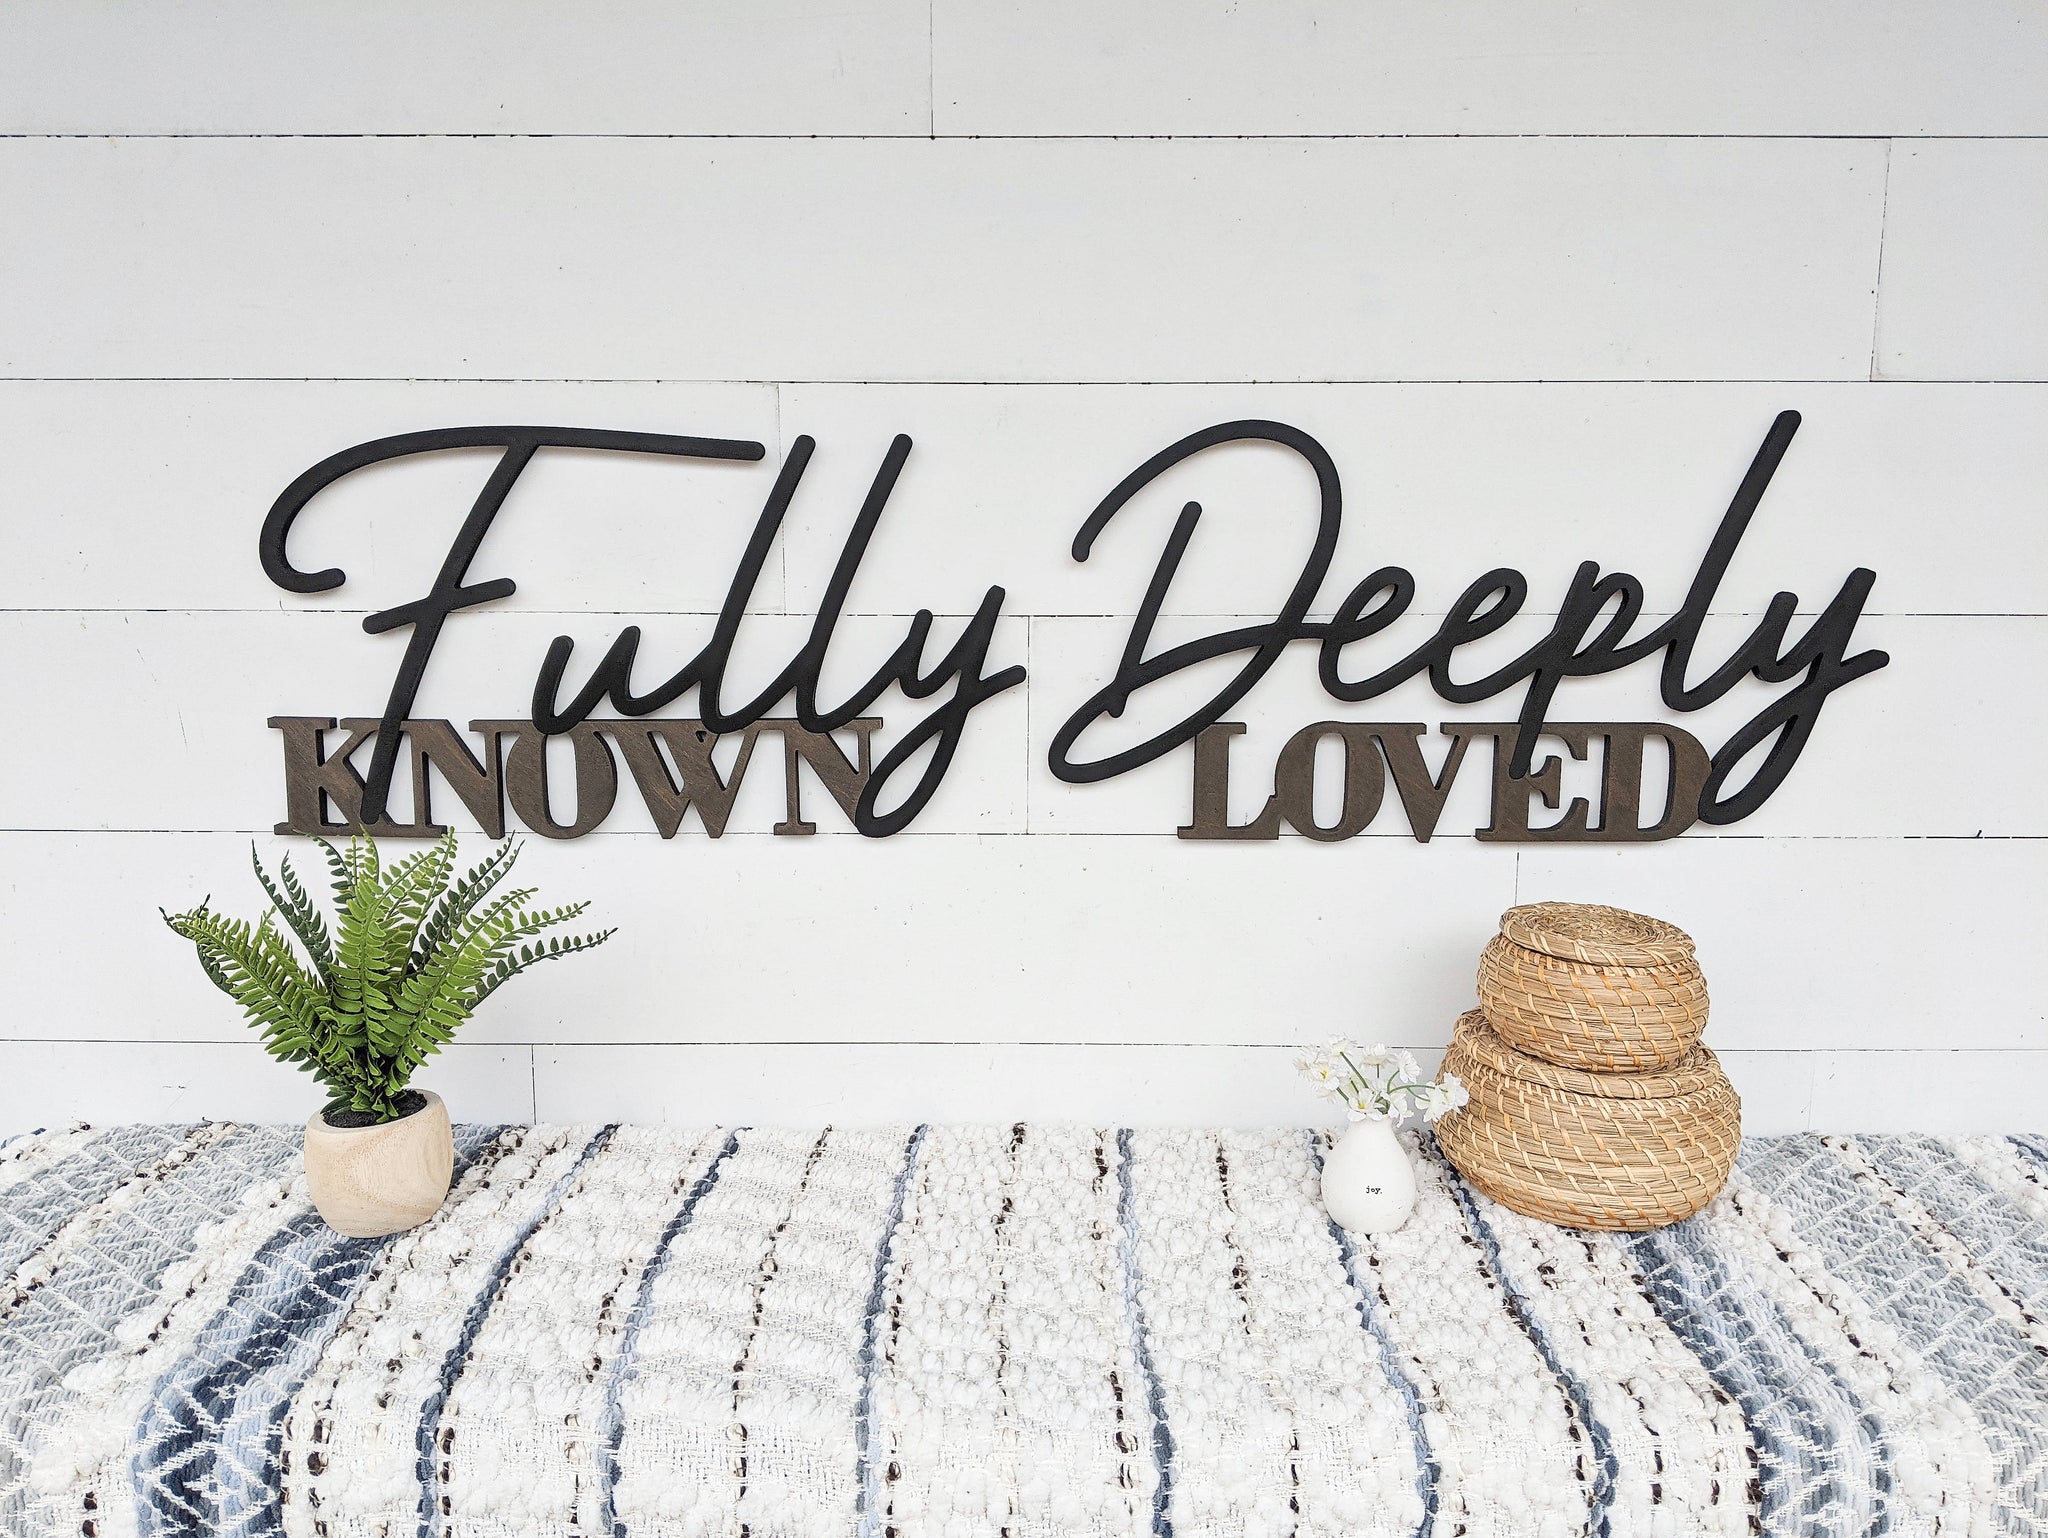 Fully Known Deeply Loved